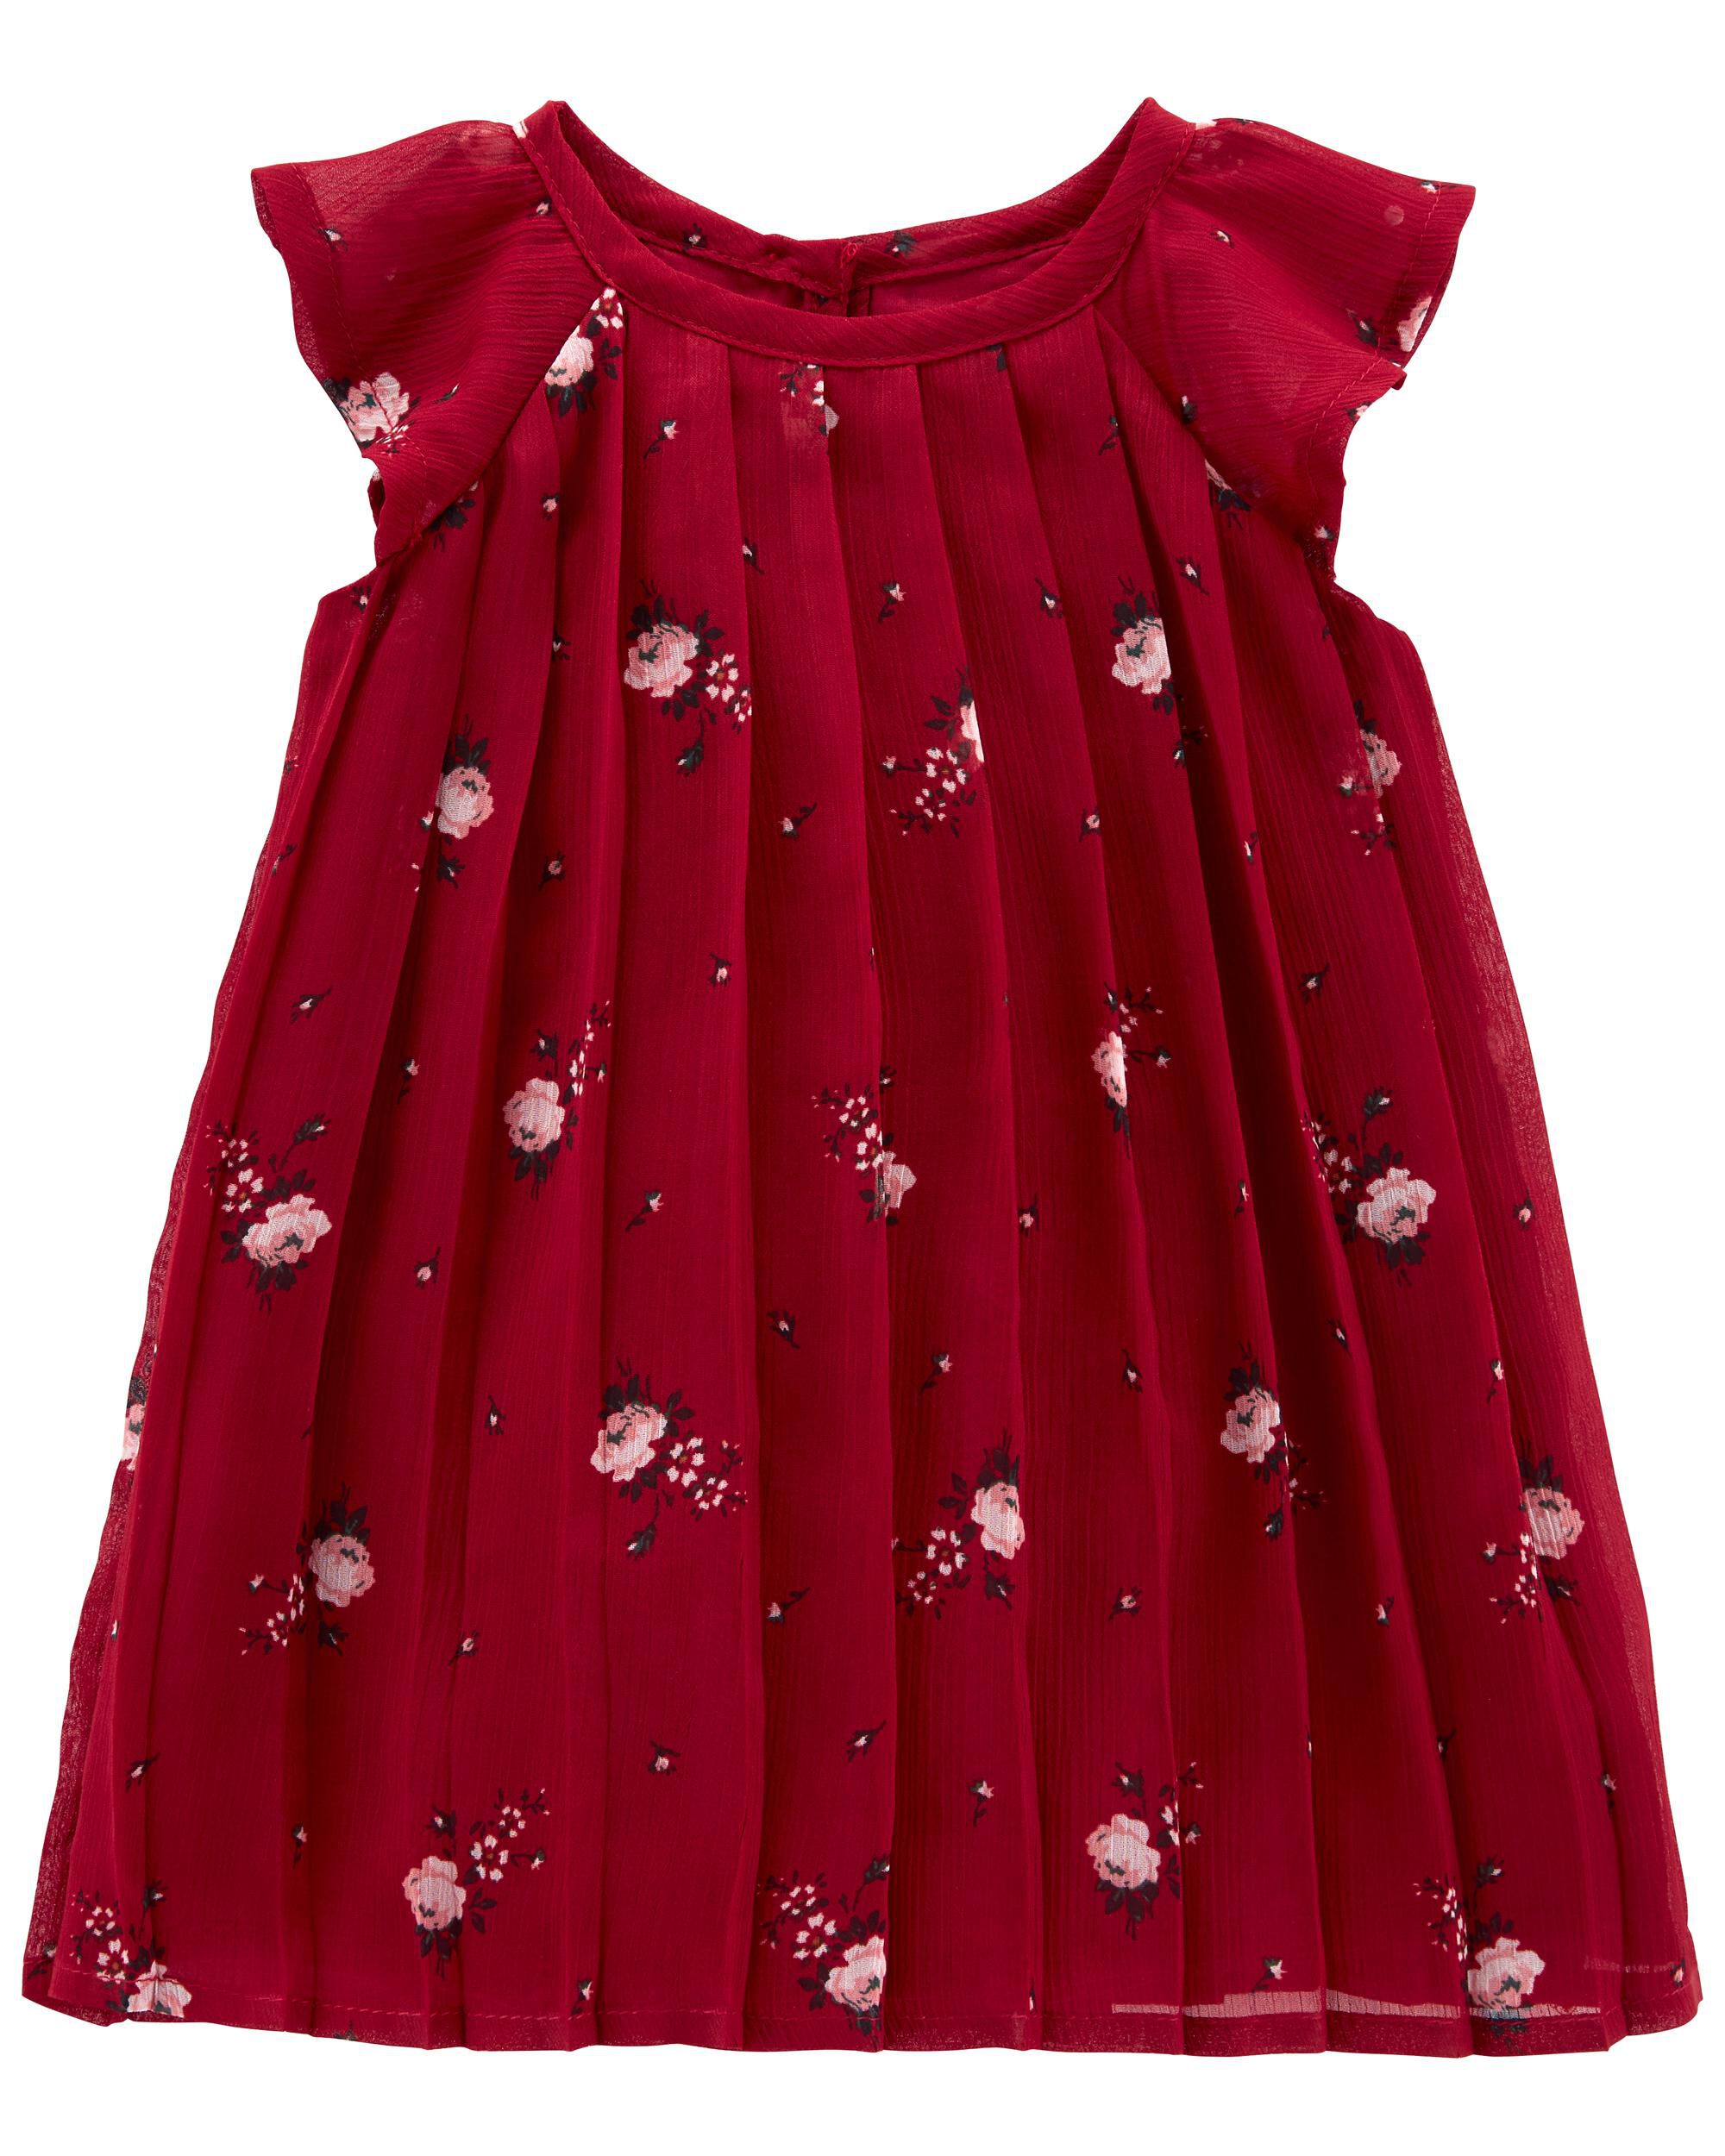 Carters Baby Pleated Chiffon Floral Dress